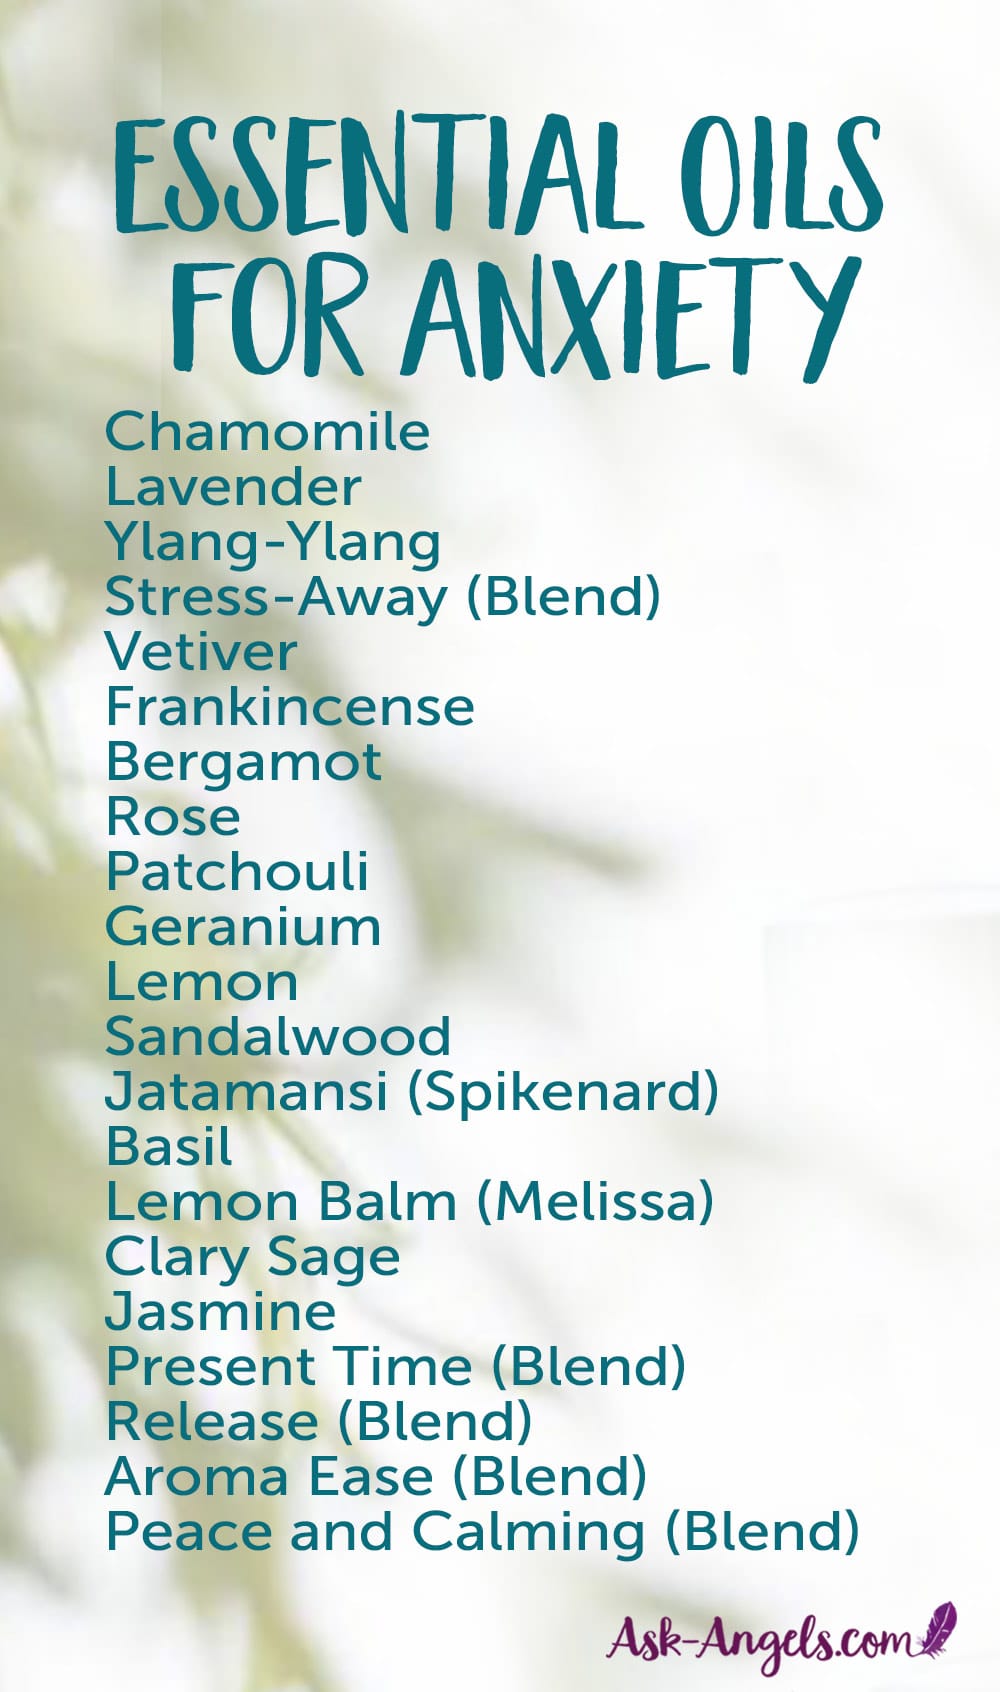 21 Essential Oils for Anxiety